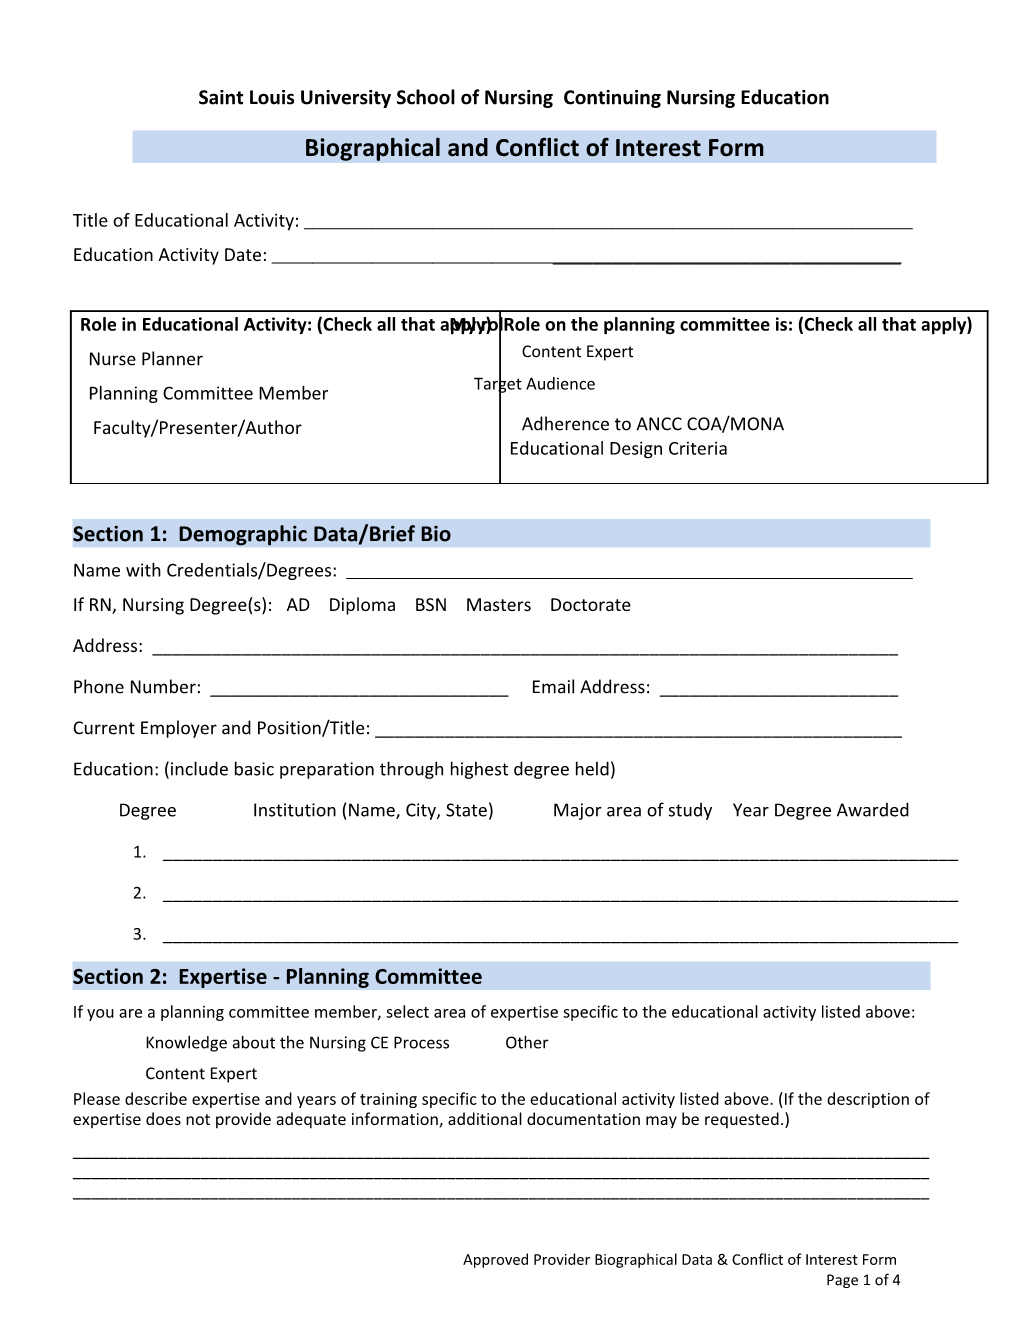 Biographical and Conflict of Interest Form